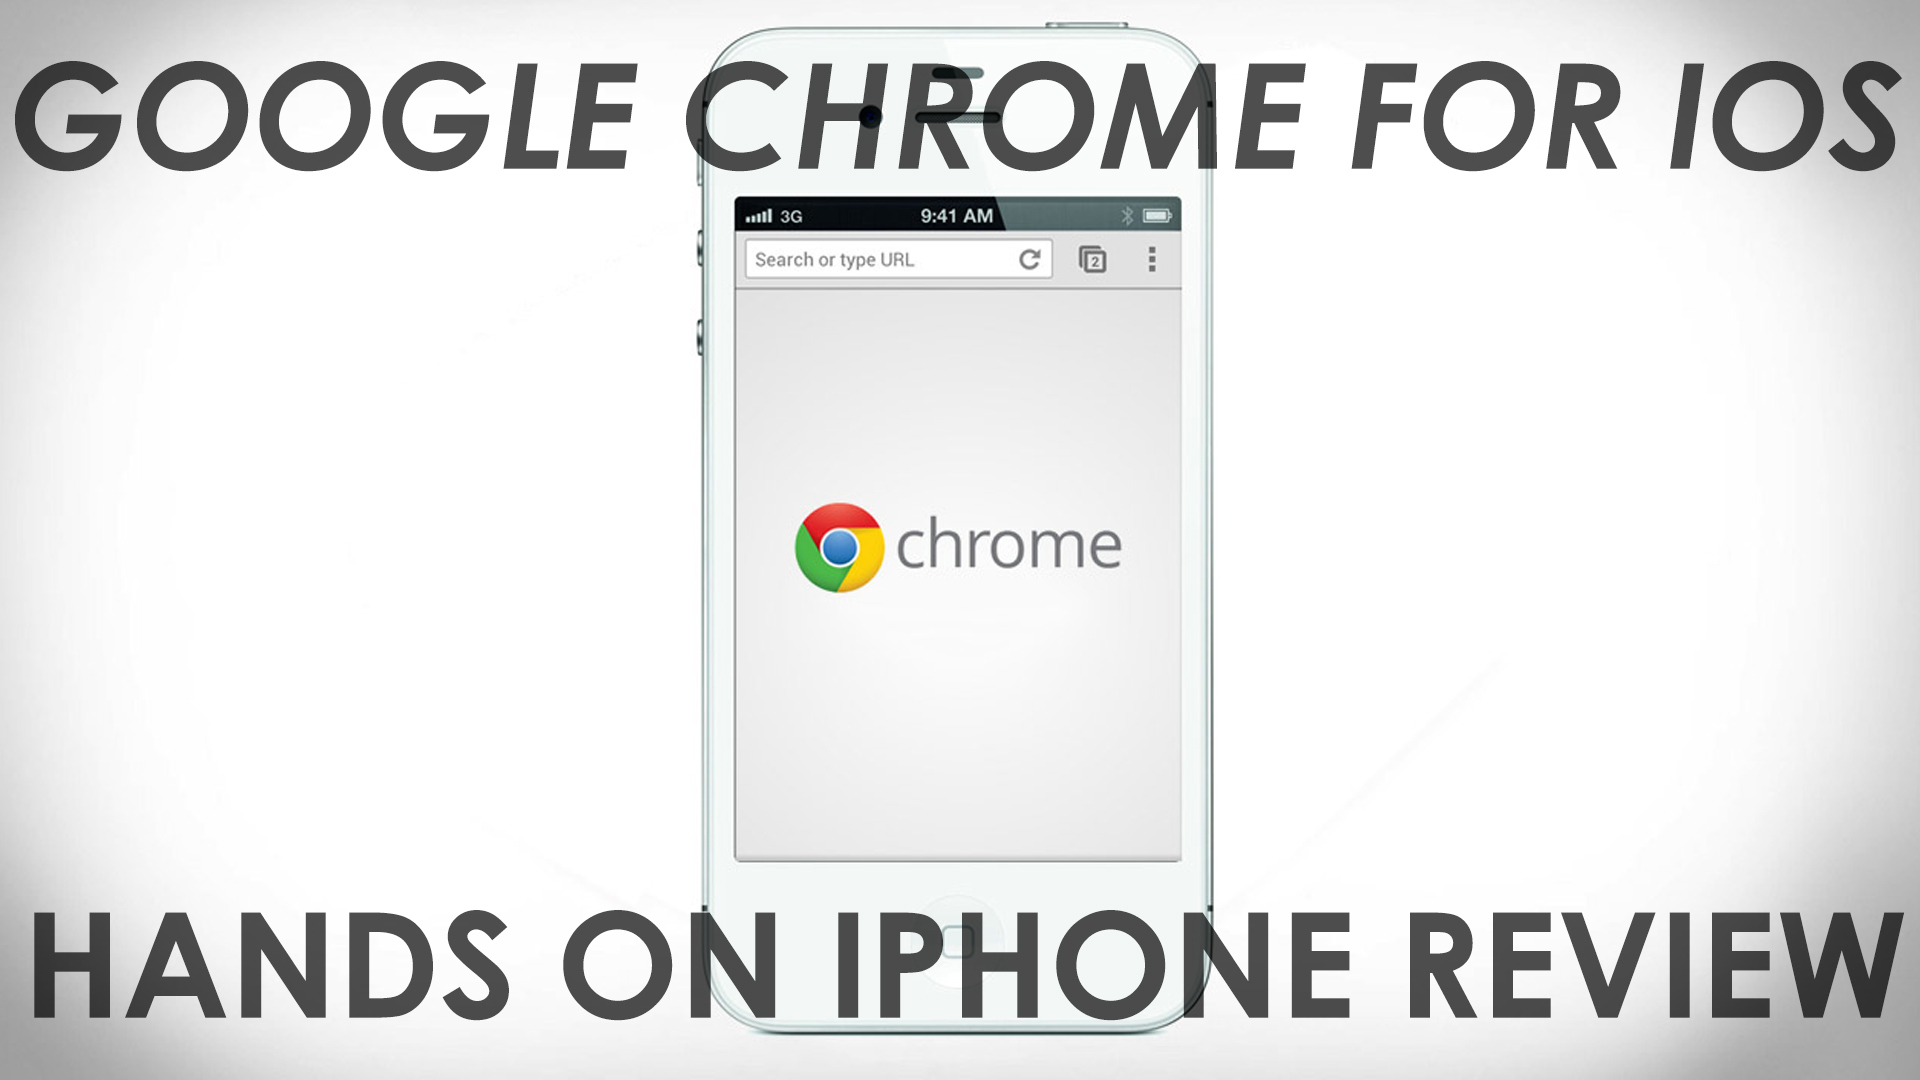 Google Chrome for iPhone Hands On [REVIEW]